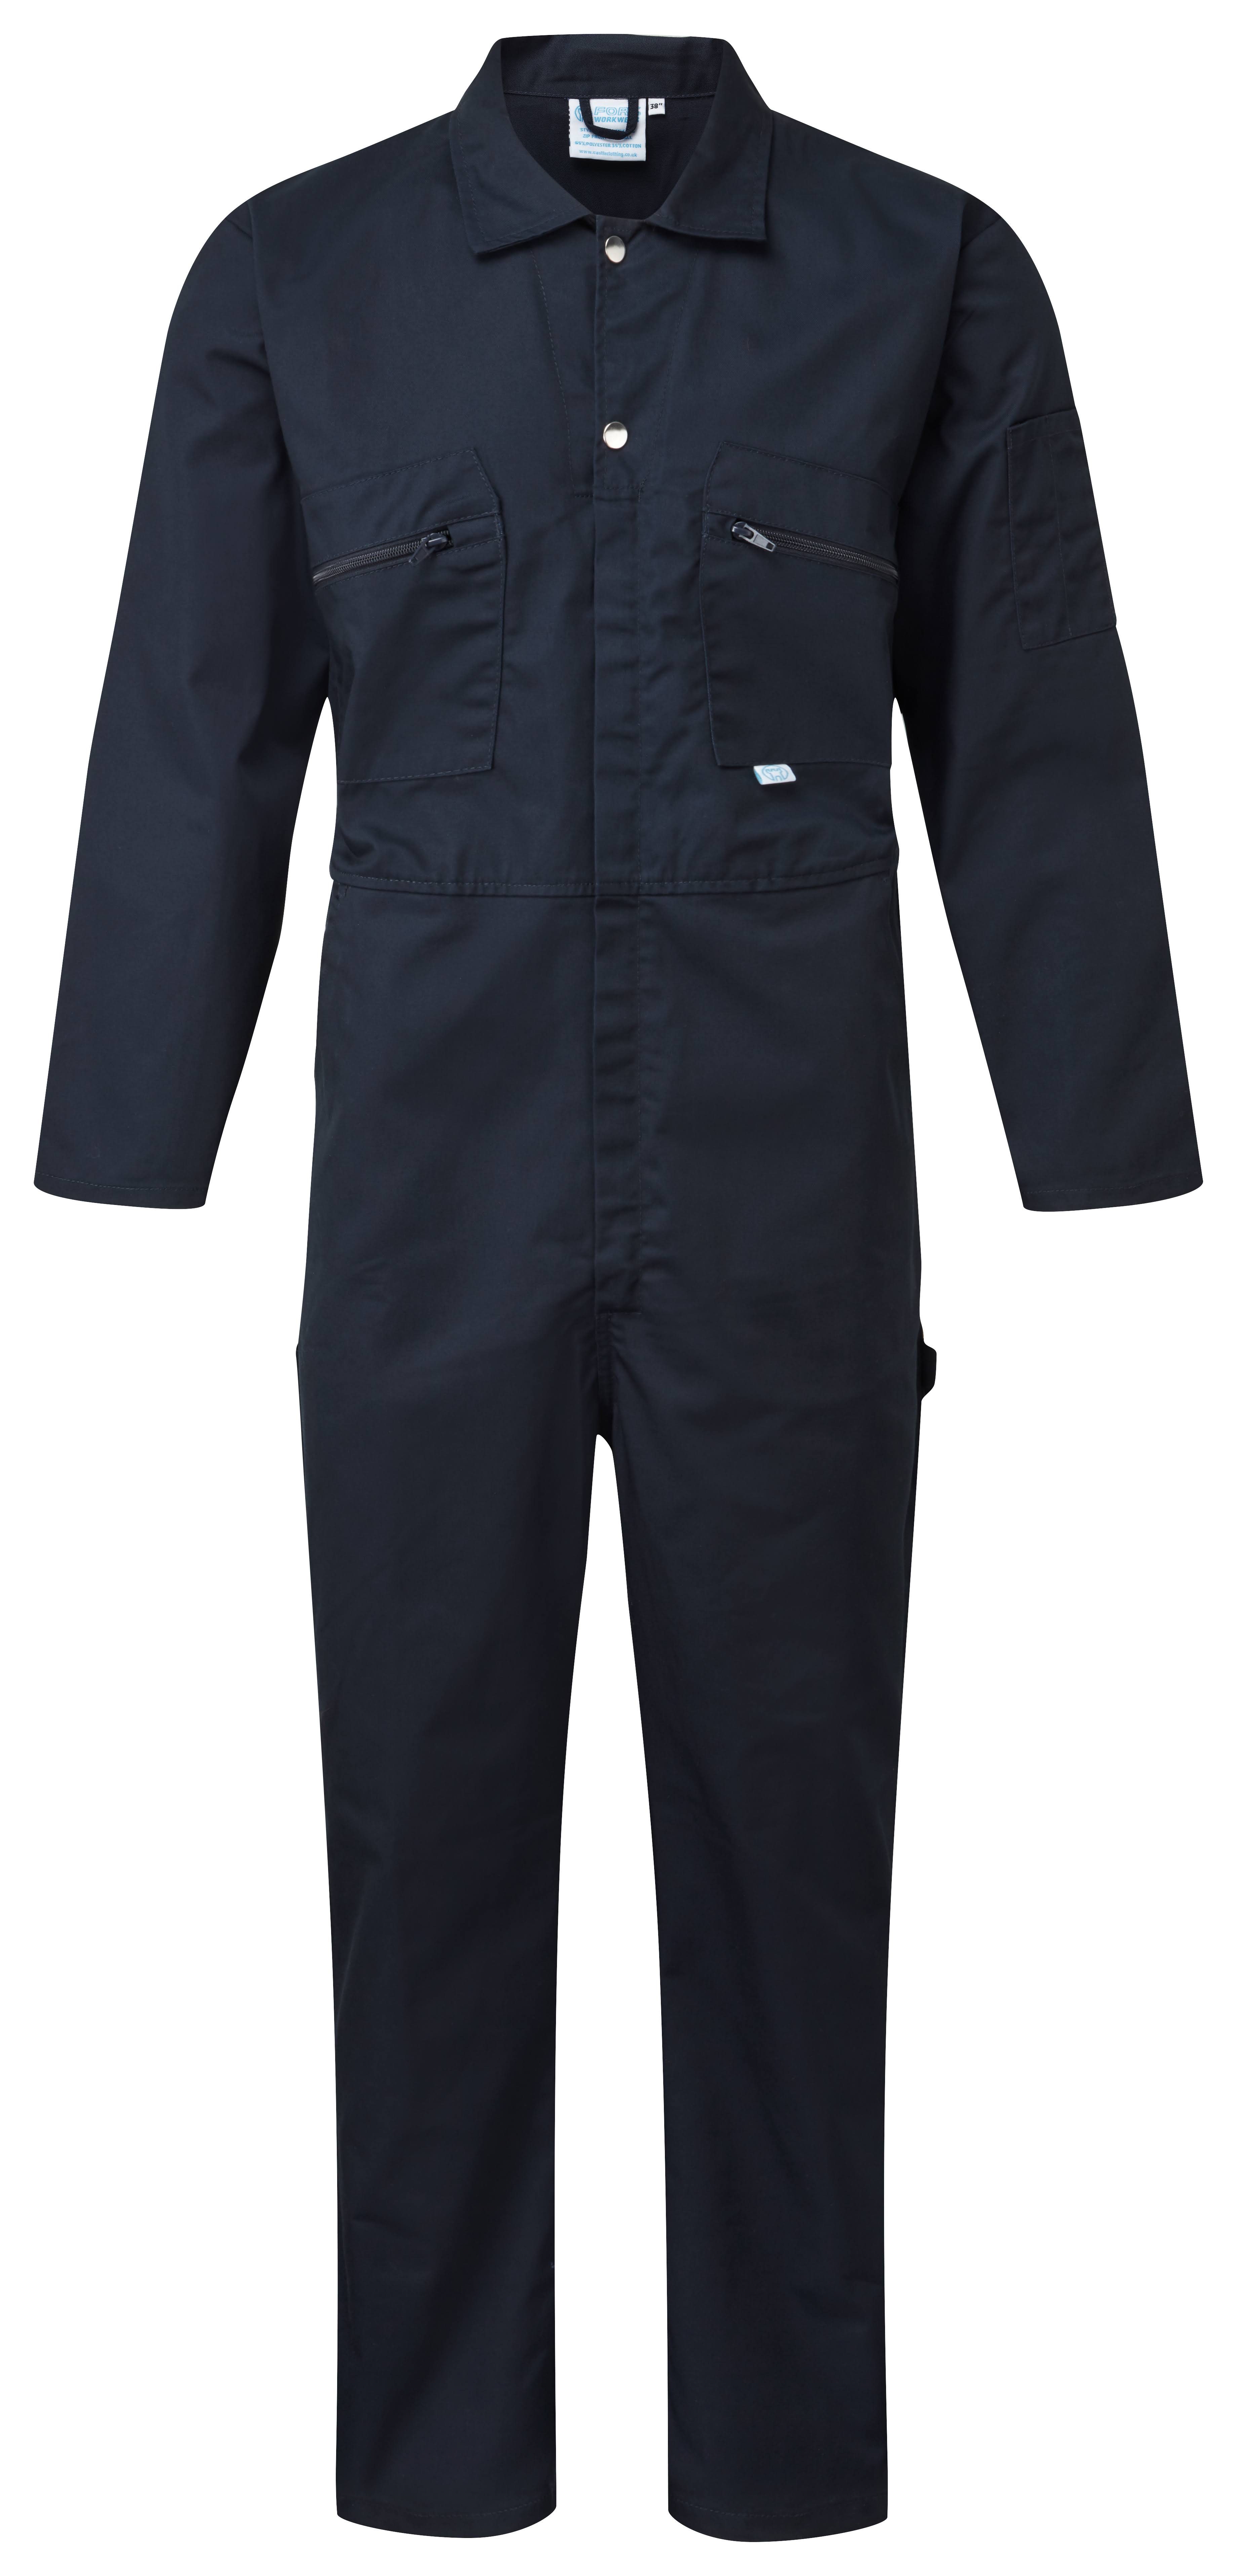 Fort Zip Front Boilersuit - Navy Blue 38 Inches